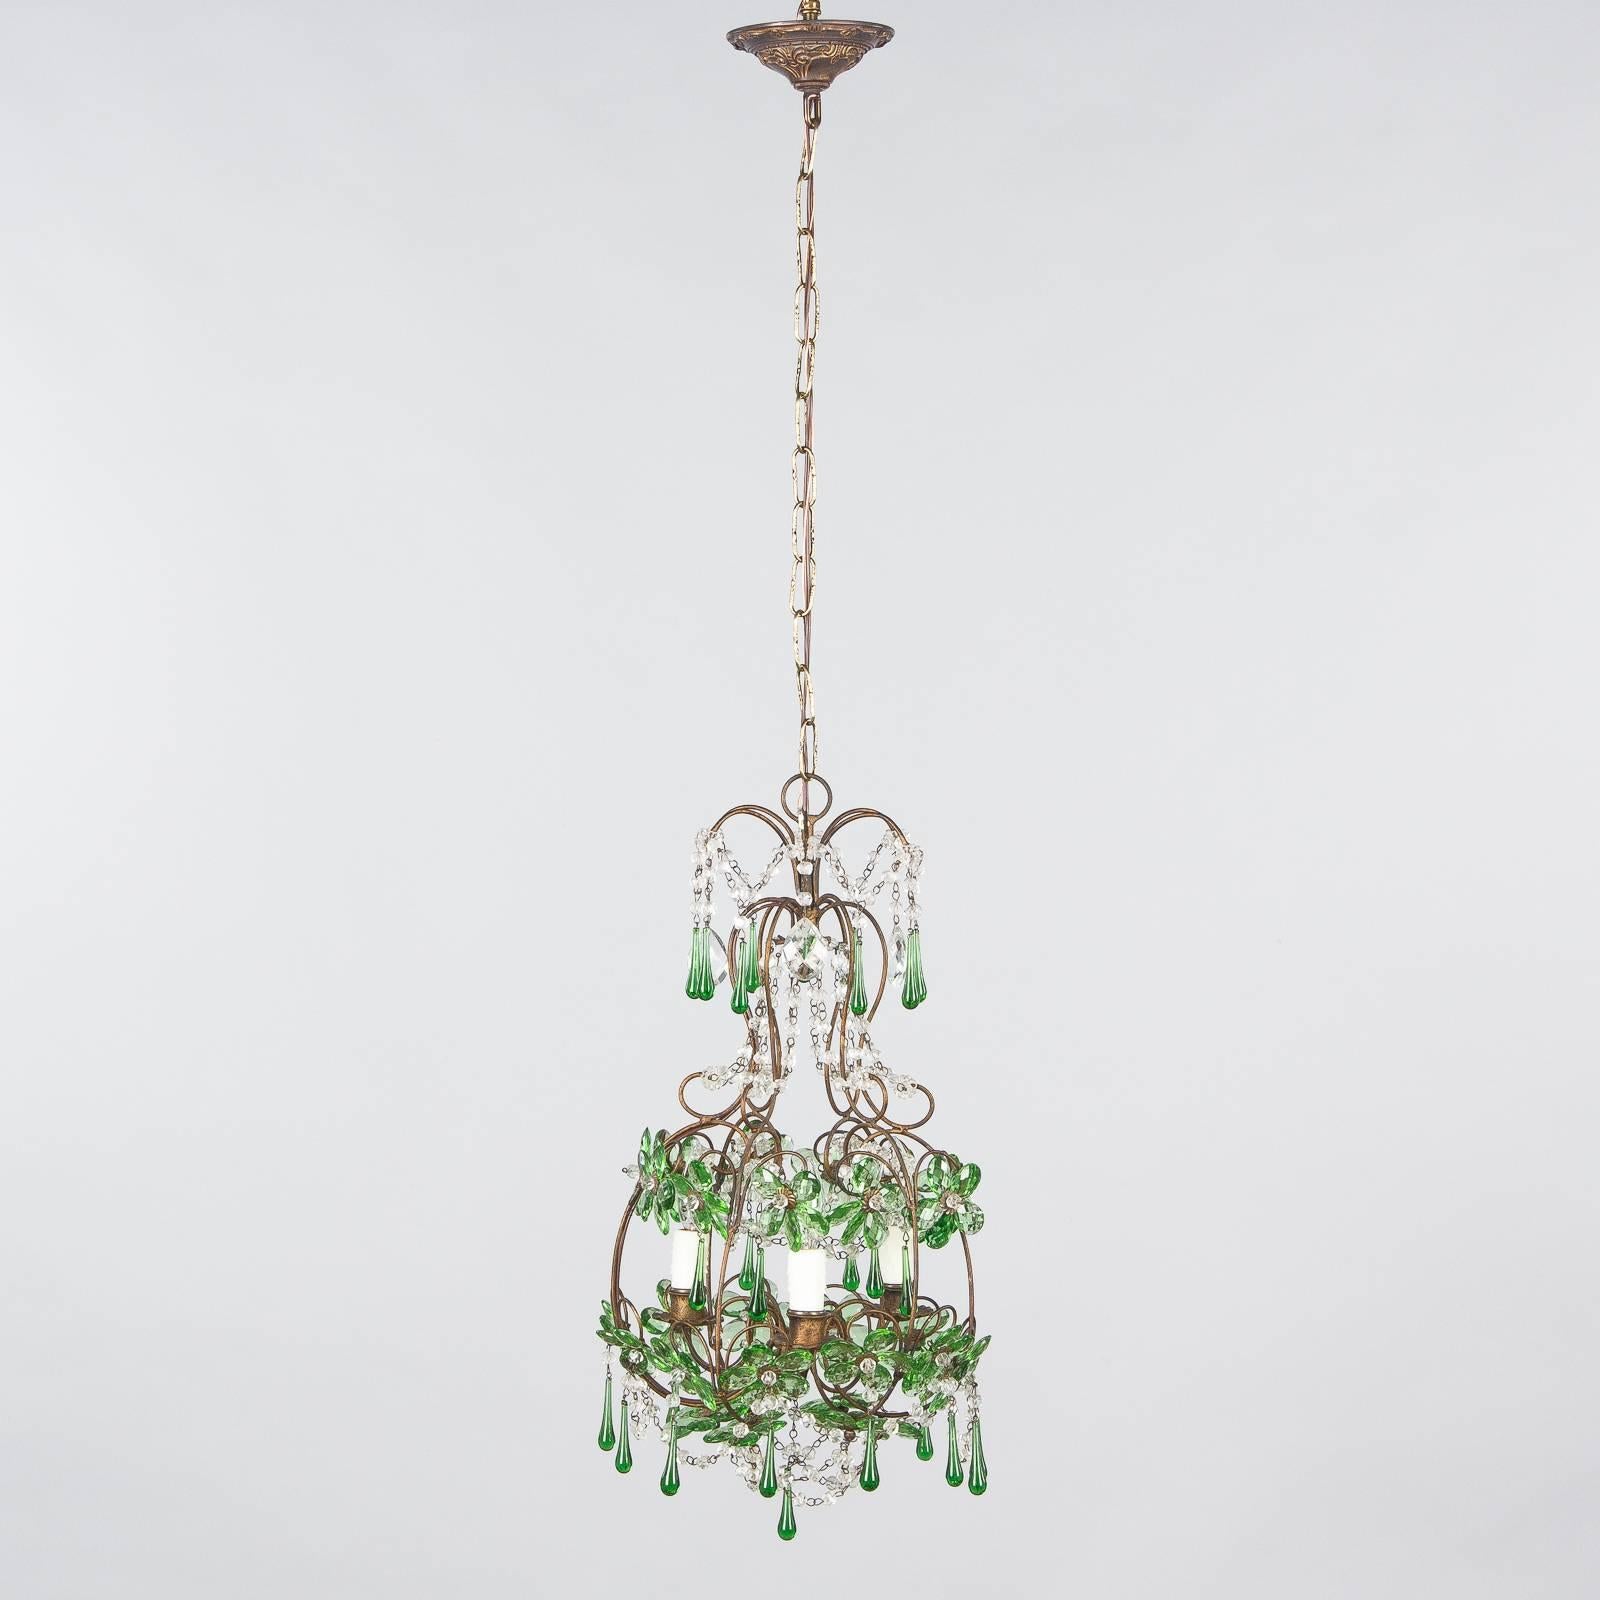 A vibrant green glass and crystal chandelier, French, circa 1920. This piece brings a hit of color as well as illumination. The scrolled gilded metal frame creates a dainty cage that cradles three lights and supports multiple tiers of glass and